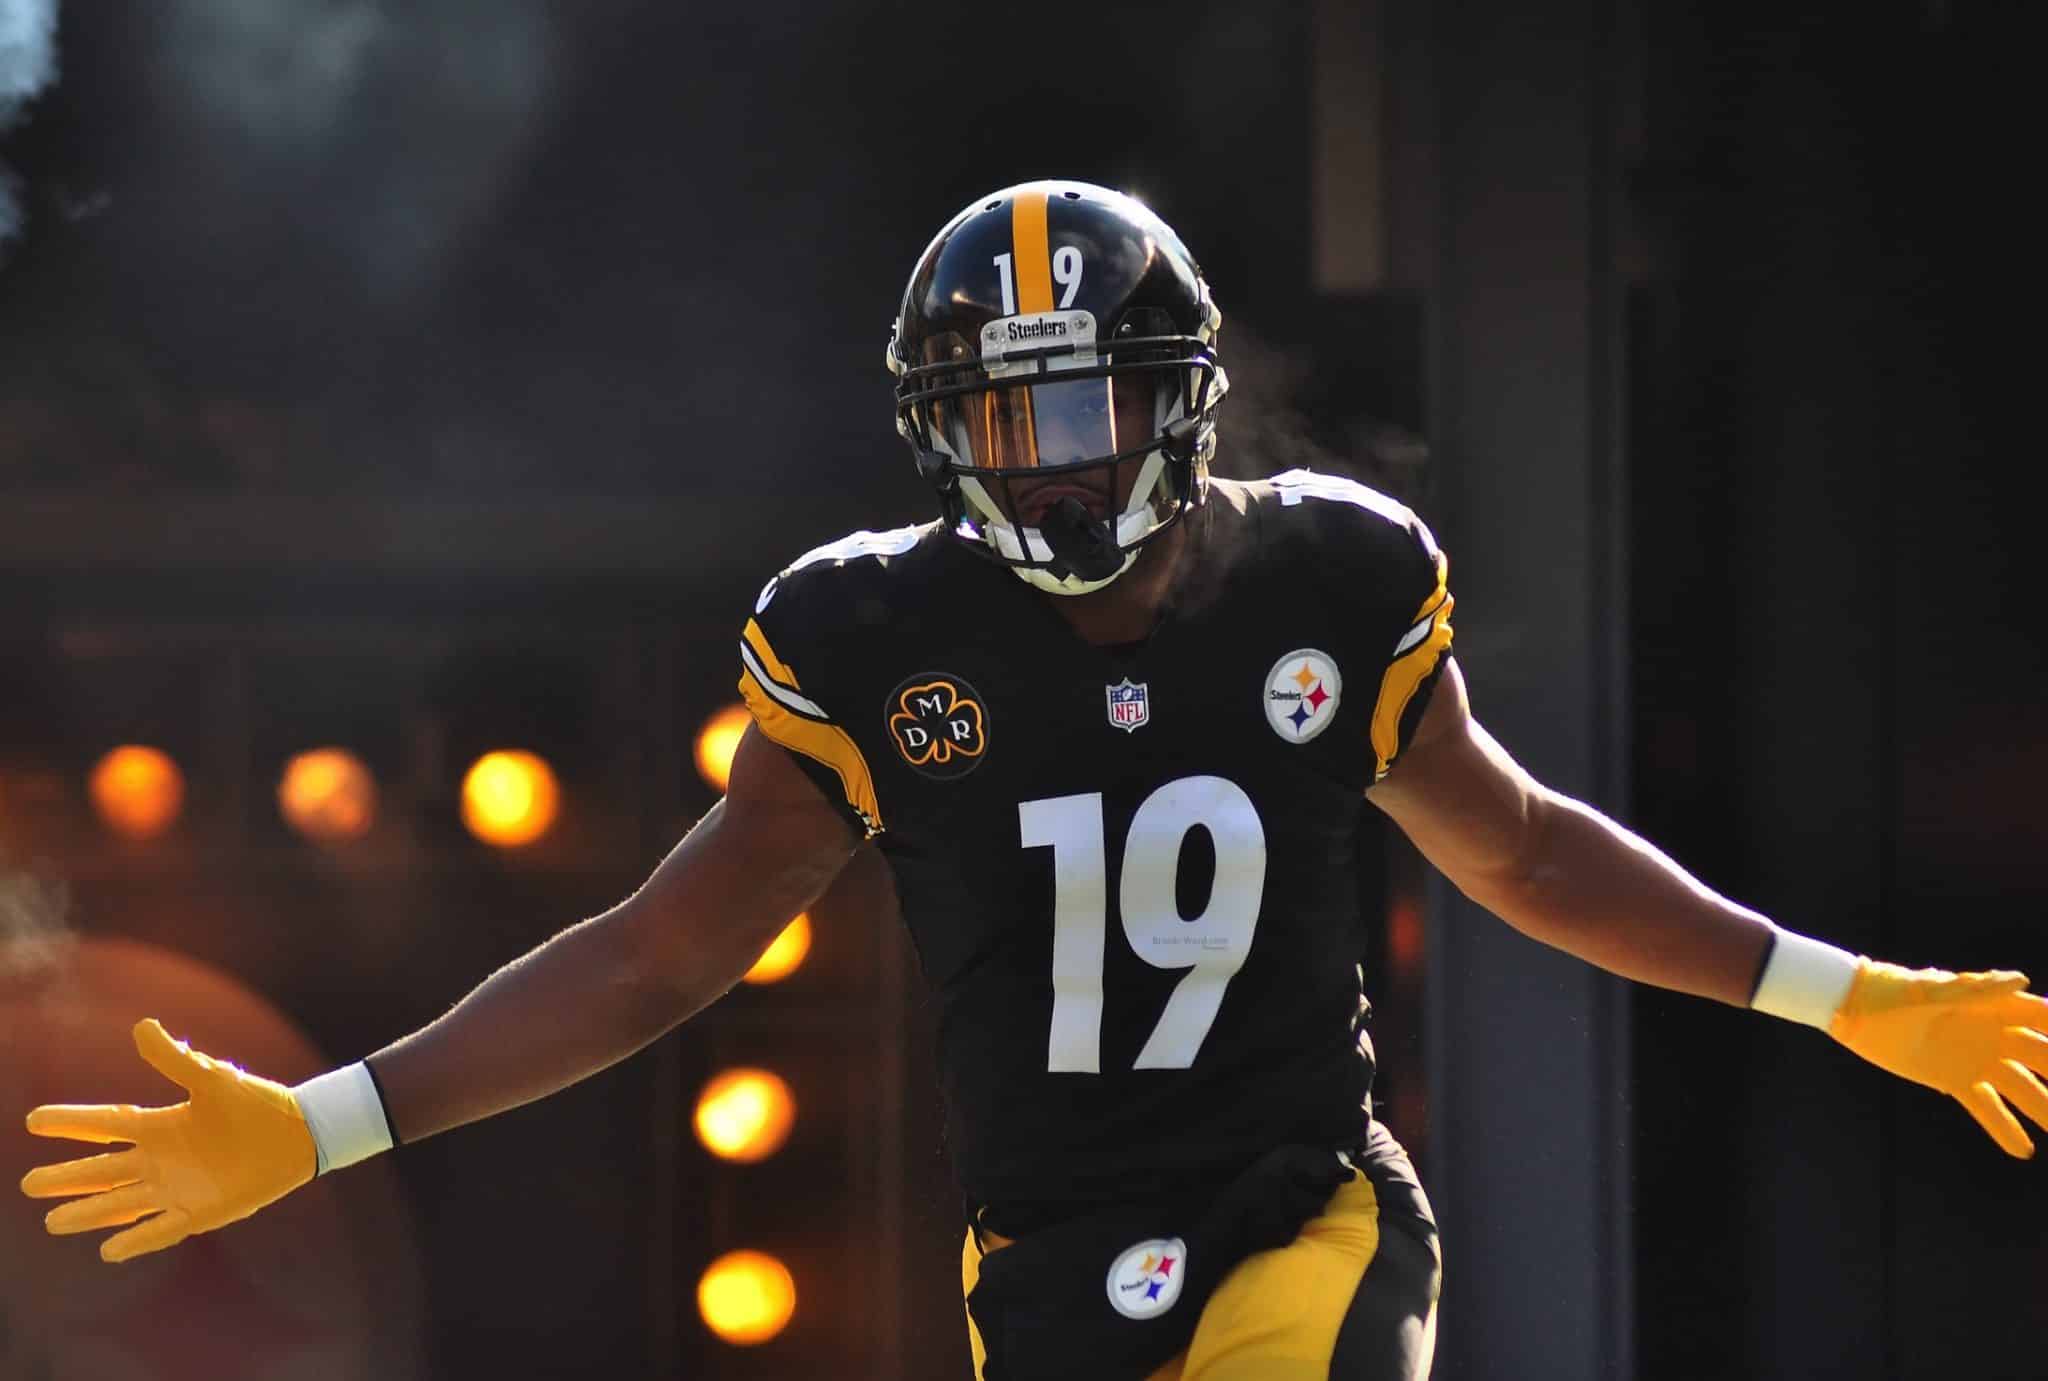 WR For The Pittsburgh Steelers Juju Smith-Schuster. Photo Credit: Brook Ward - Under Creative Commons License